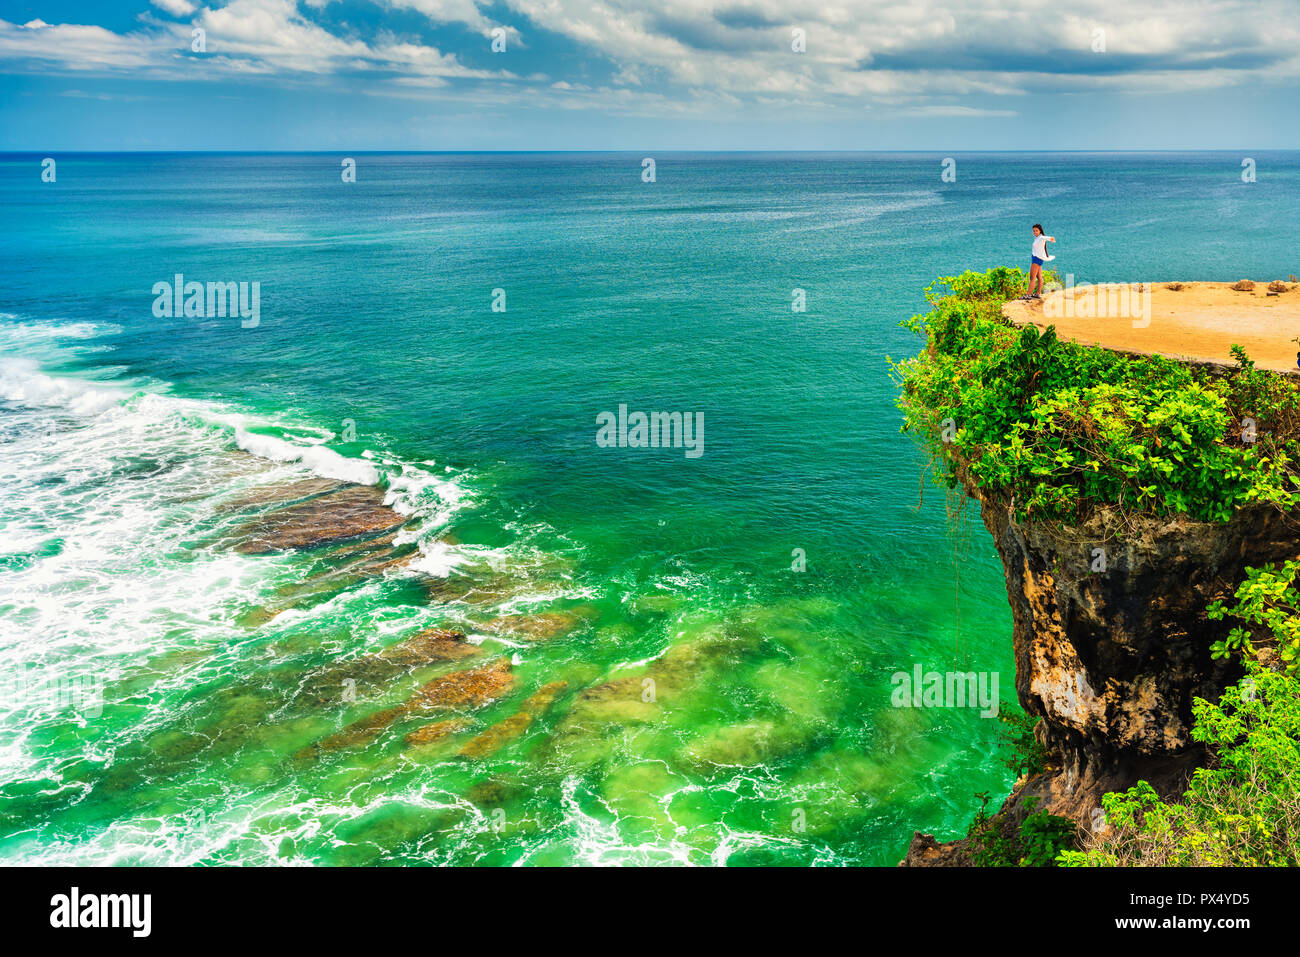 Page 10 Sri Lanka Beach Woman High Resolution Stock Photography And Images Alamy